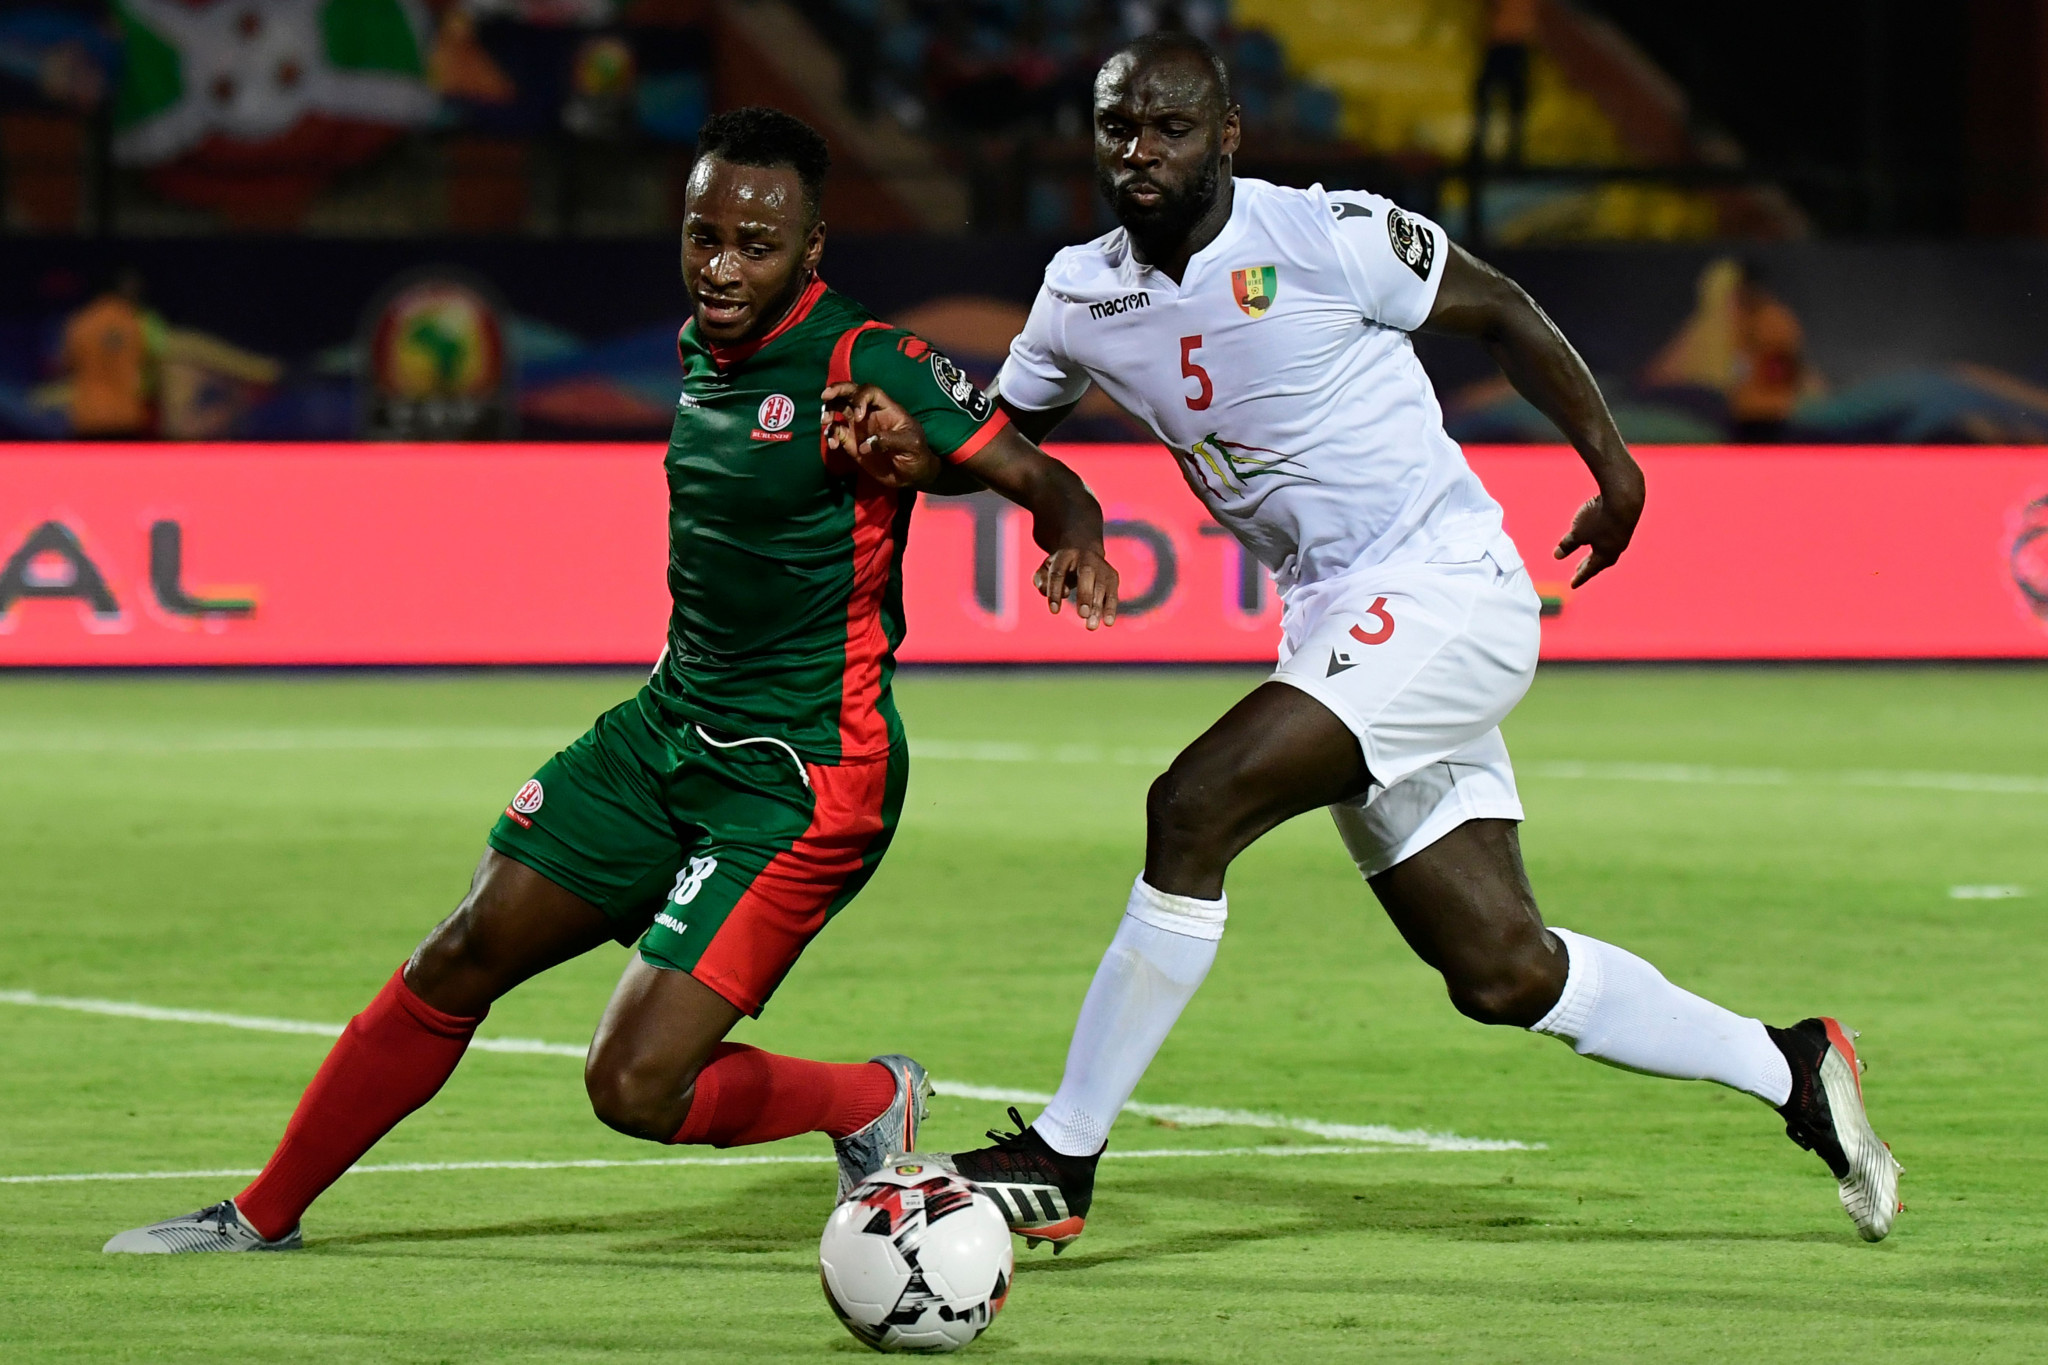 Burundi lost all three of their matches at their first Africa Cup of Nations ©Getty Images